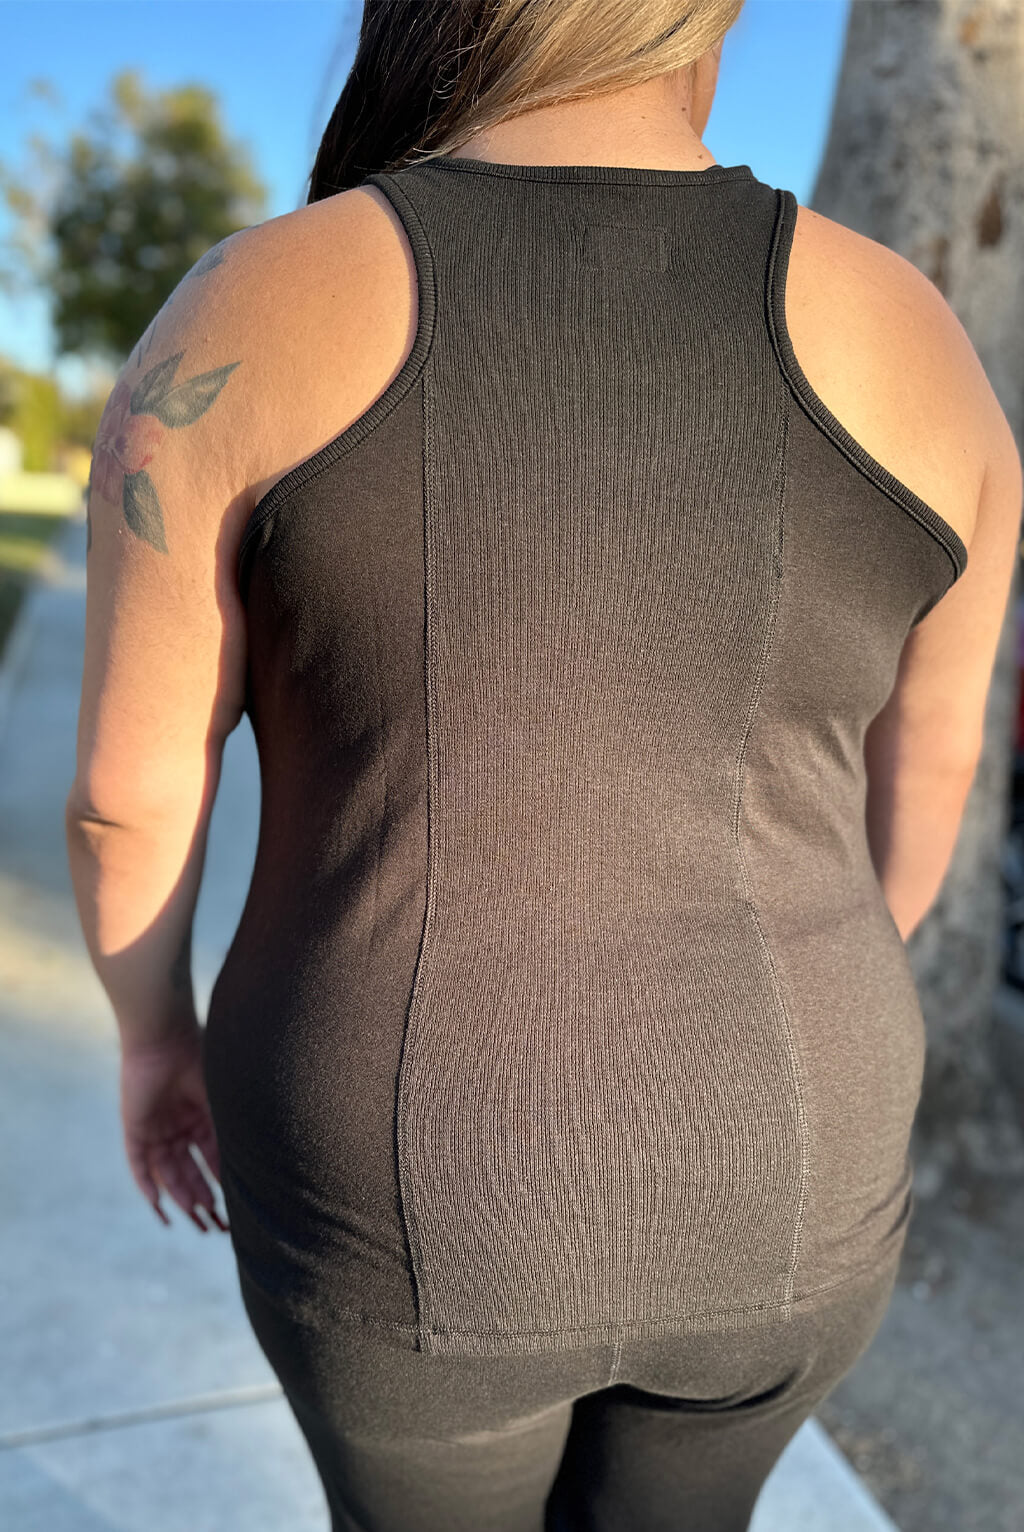 Back view of the Superfit Hero's new launch Ribbed Back Flow Tank Top in color Black.